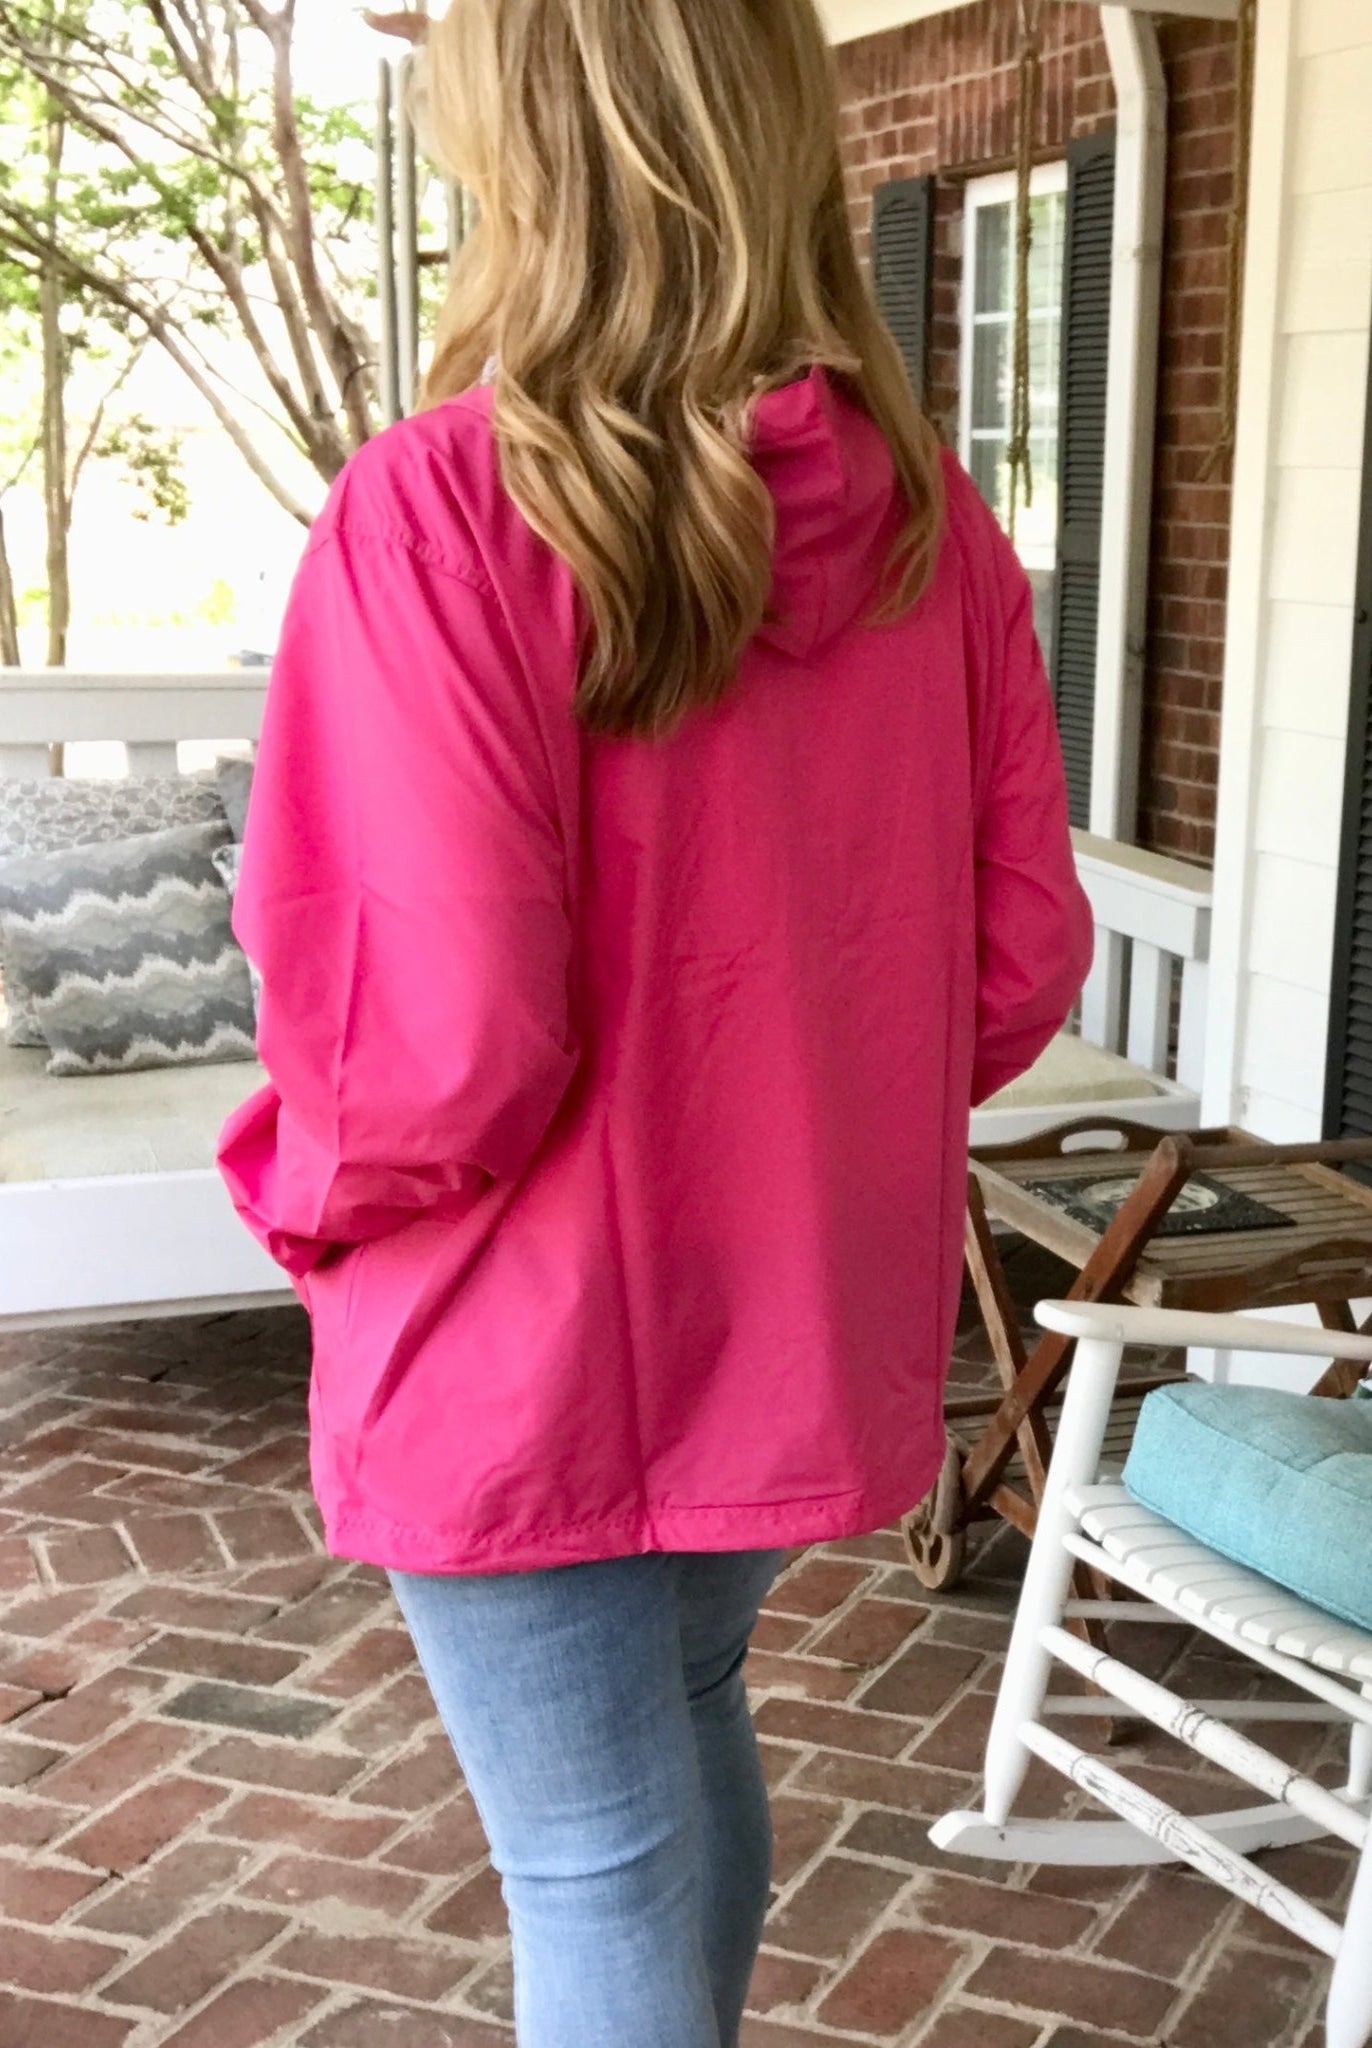 Charles River Unlined Pullover Rain Jacket--Hot Pink - Rain Jacket -Jimberly's Boutique-Olive Branch-Mississippi